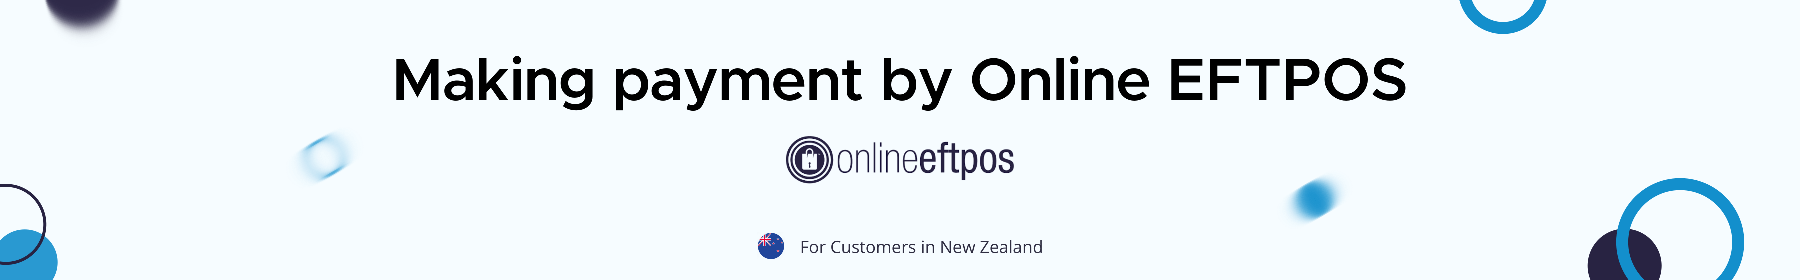 Making Payment By Online Eftpos